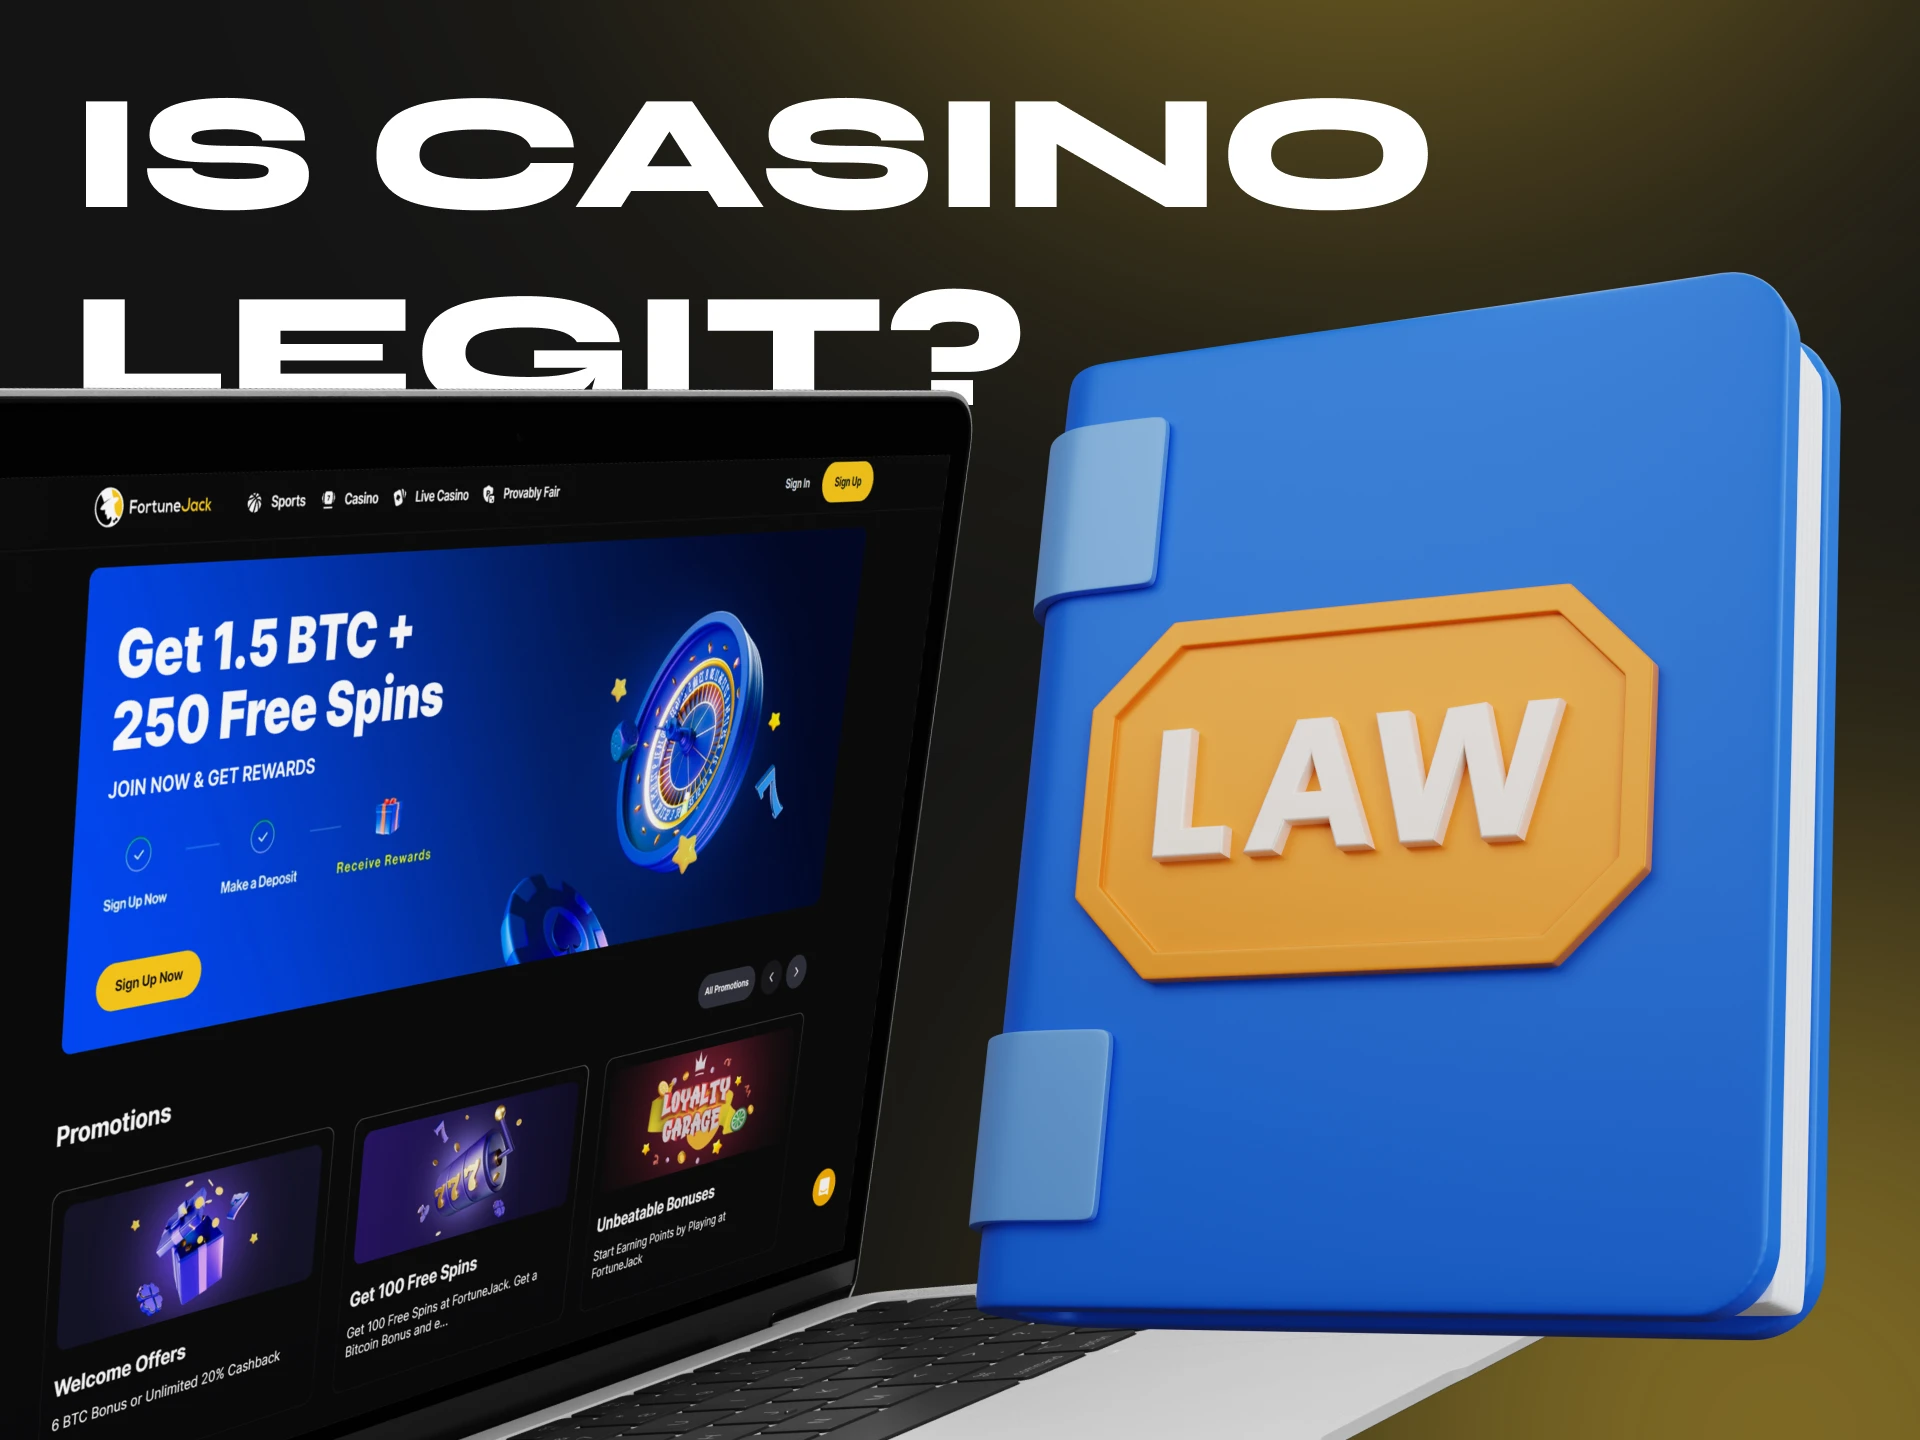 Betting at FortuneJack Casino is legal.